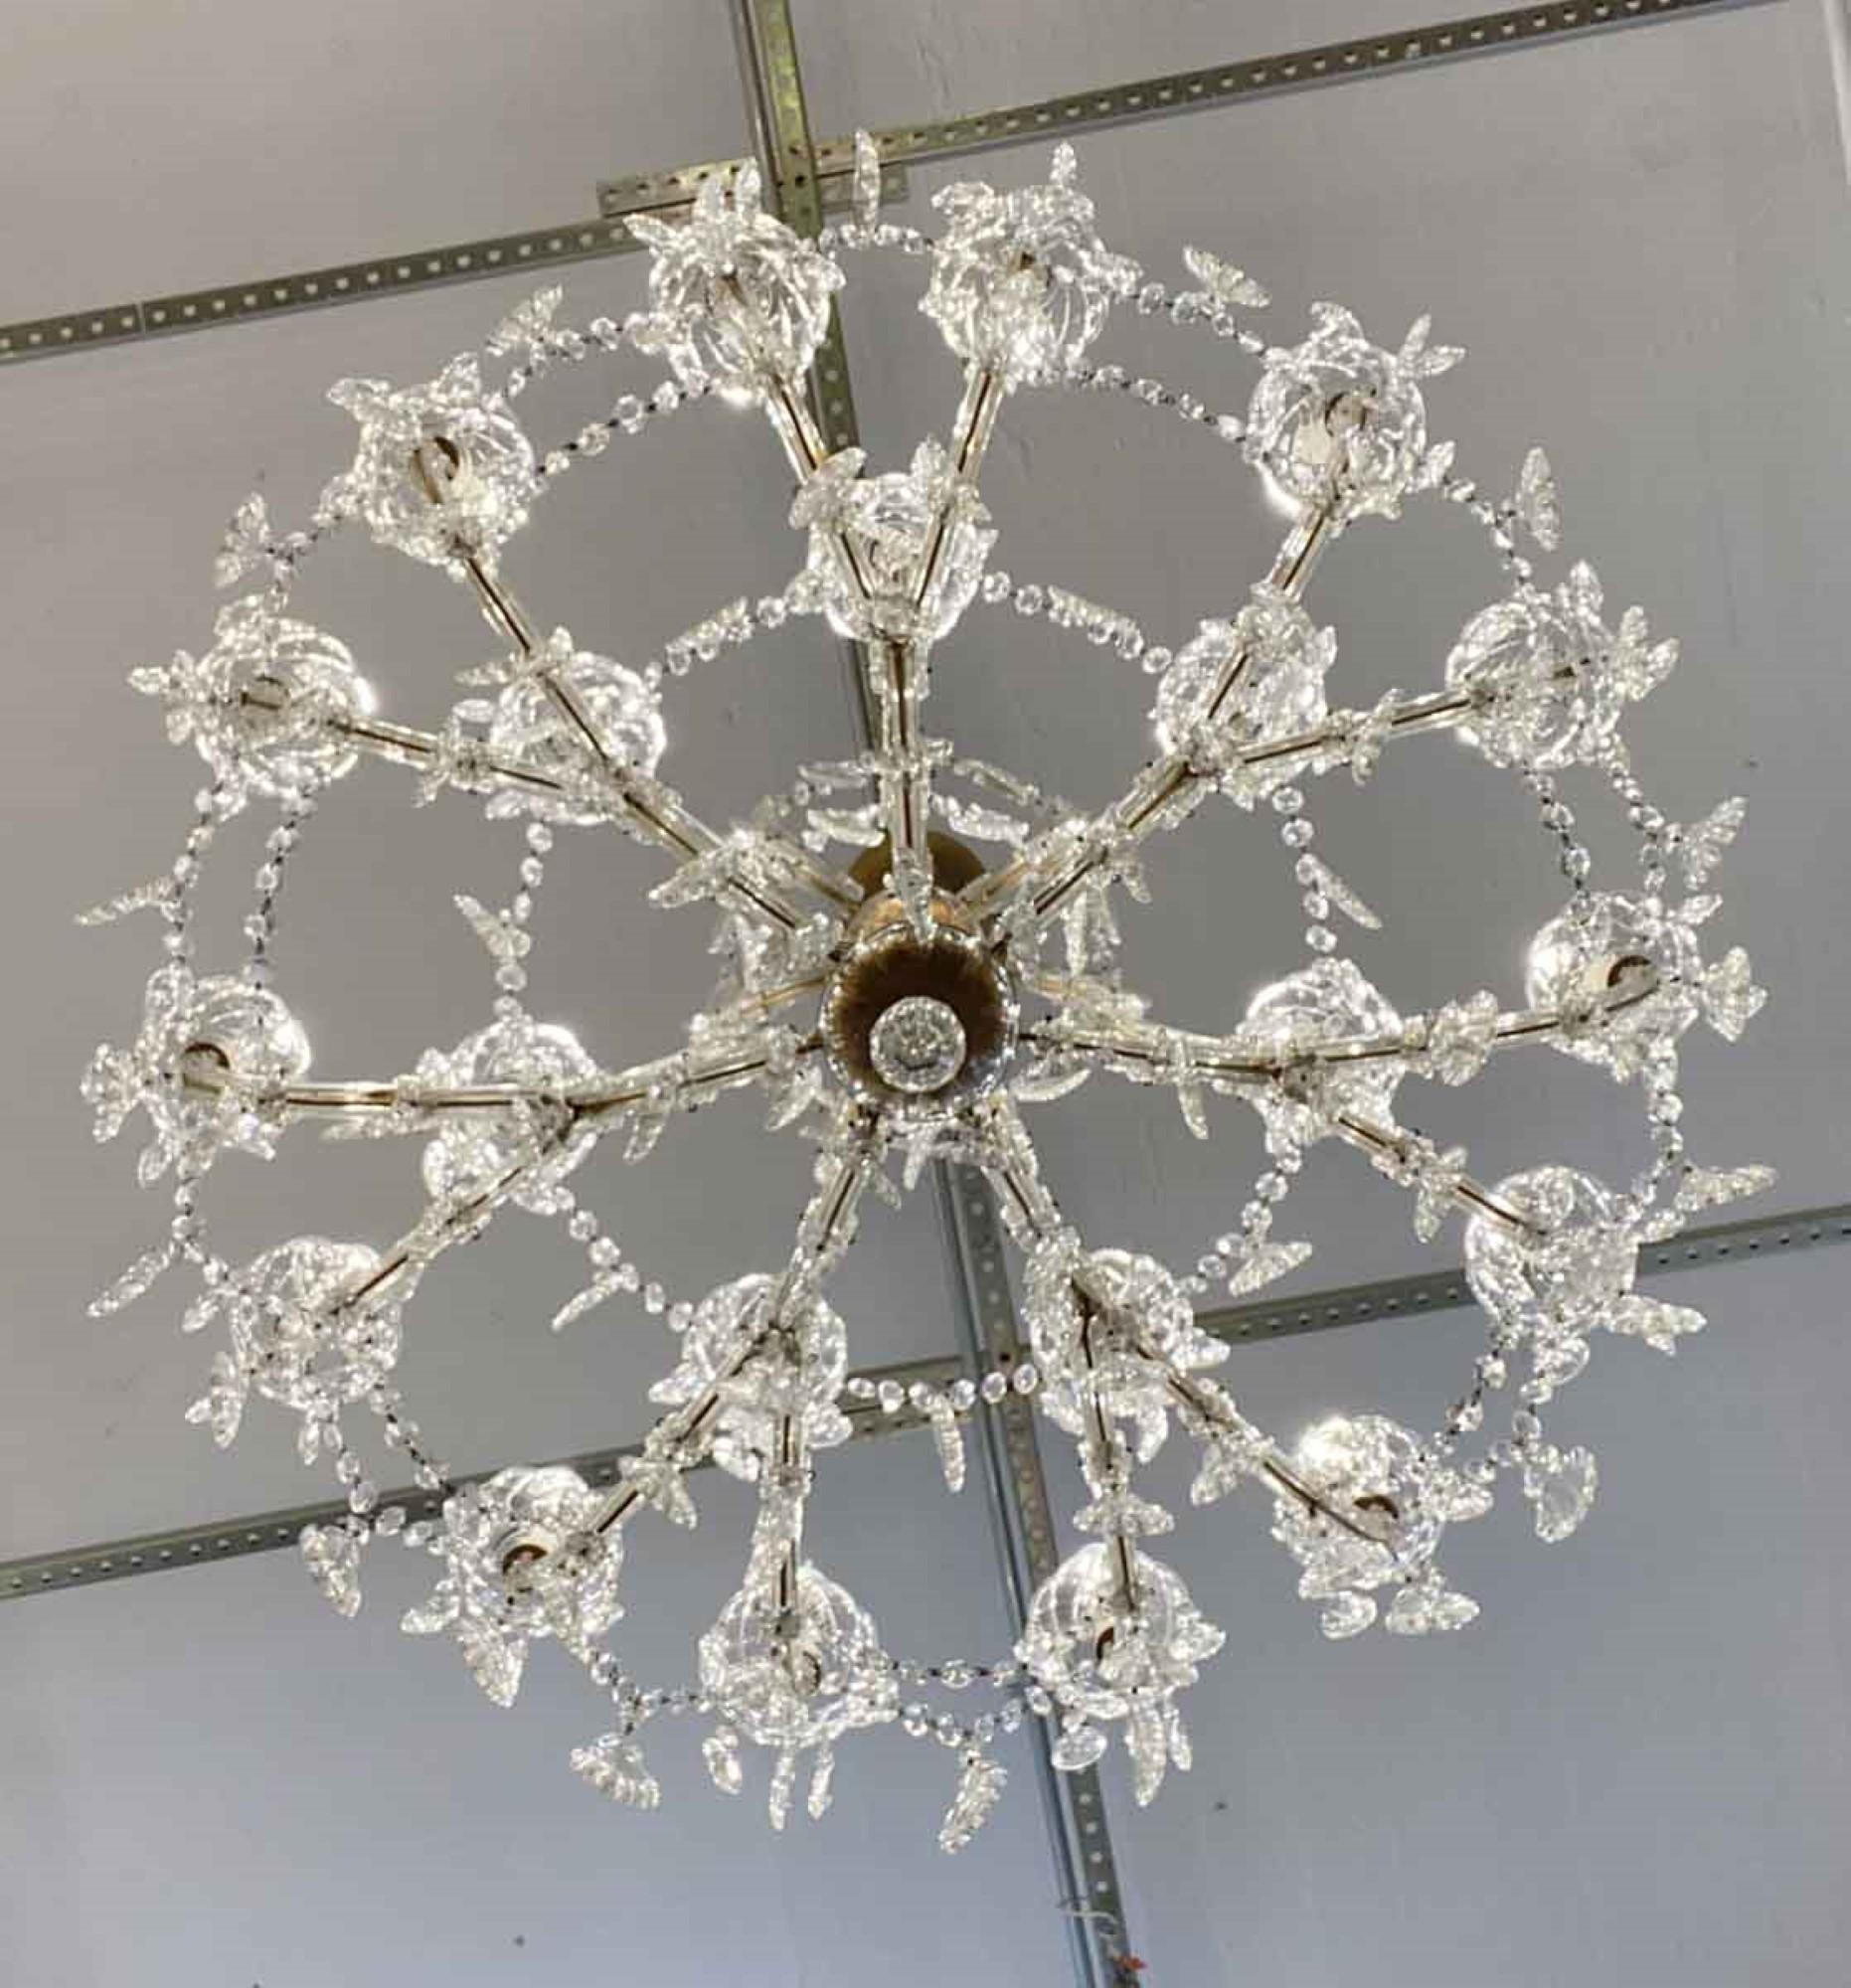 Mid-20th Century 1950s Marie Therese Crystal Chandelier 21 Arms Substantial Size Antique